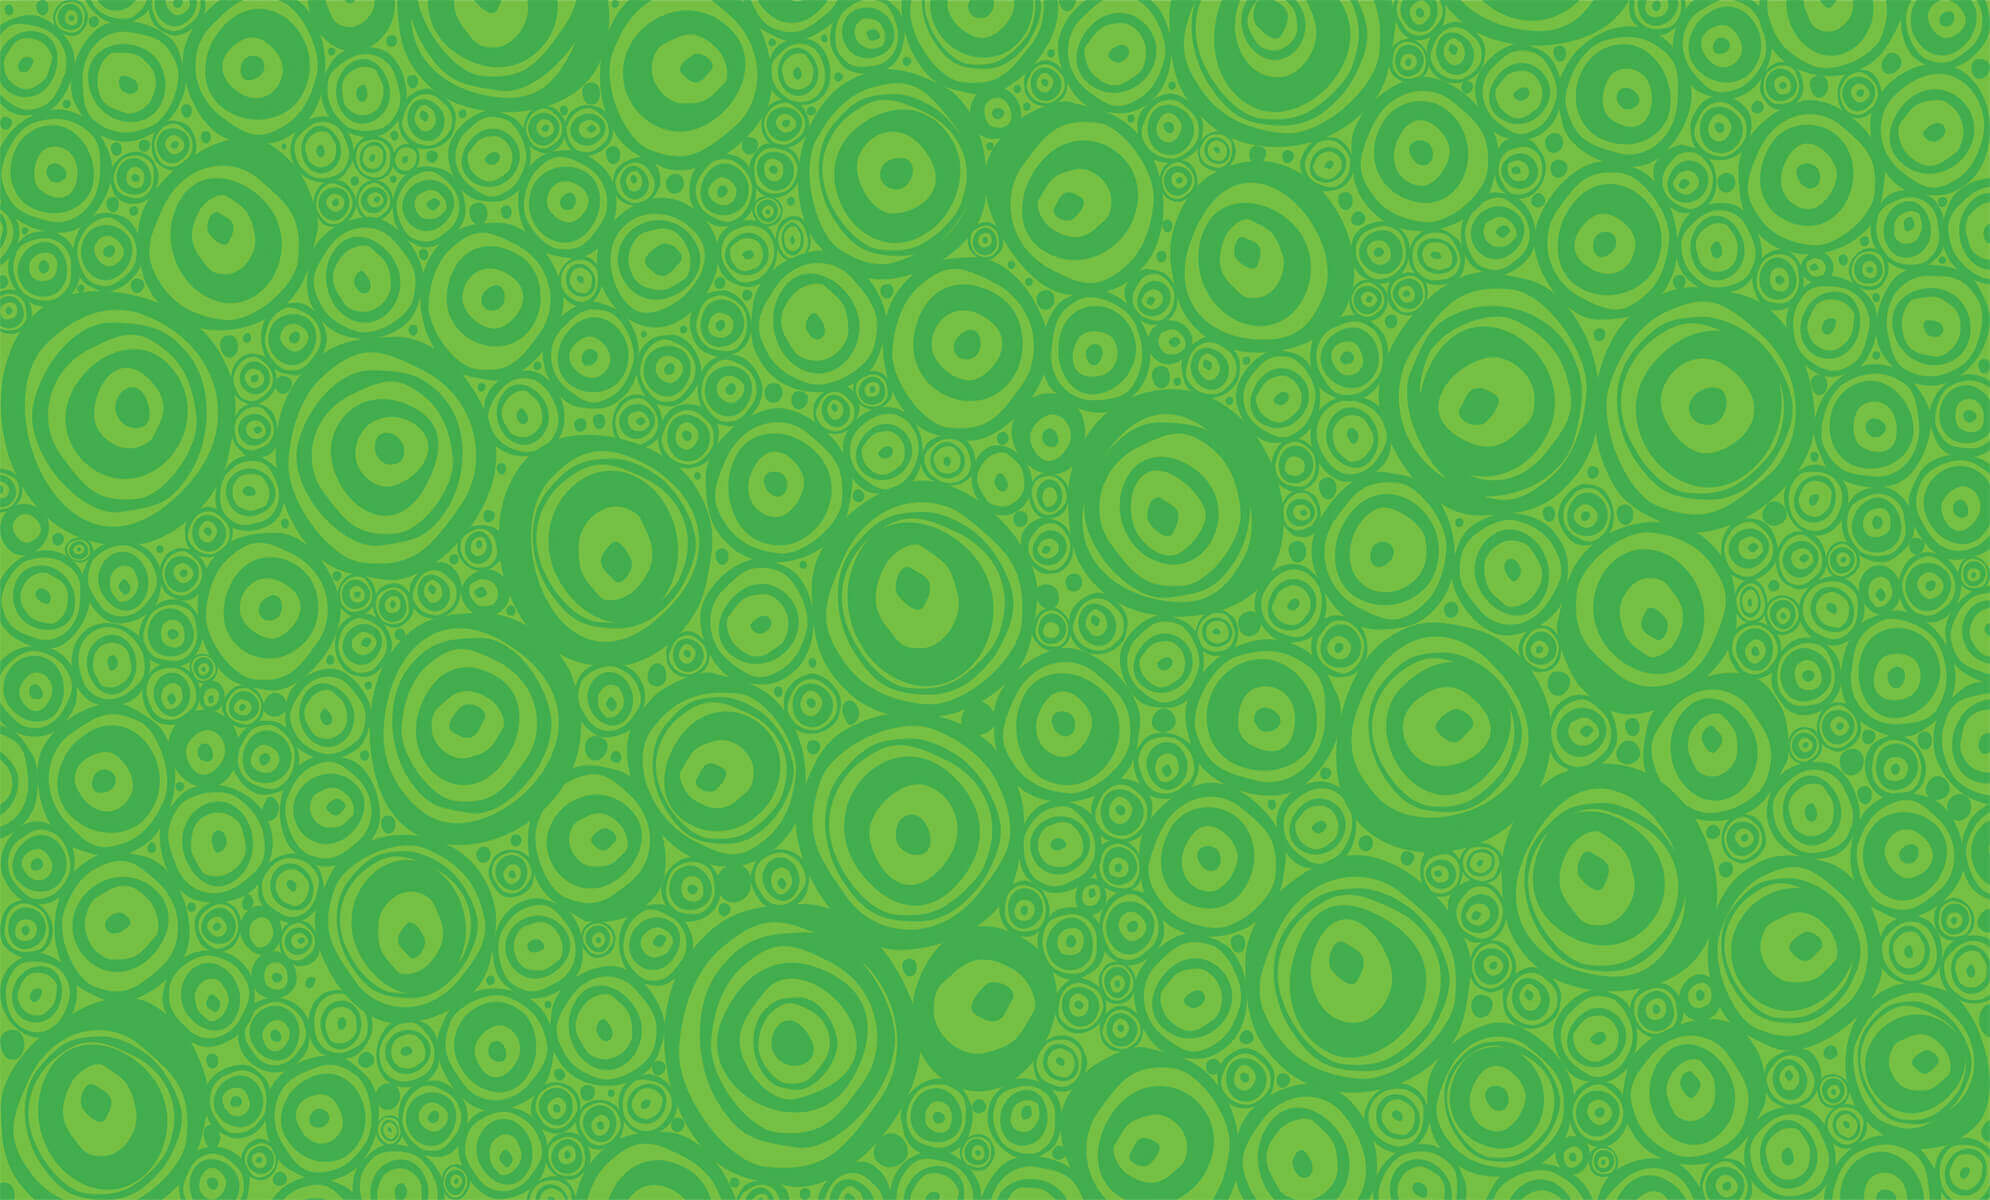 Background circles - lime green